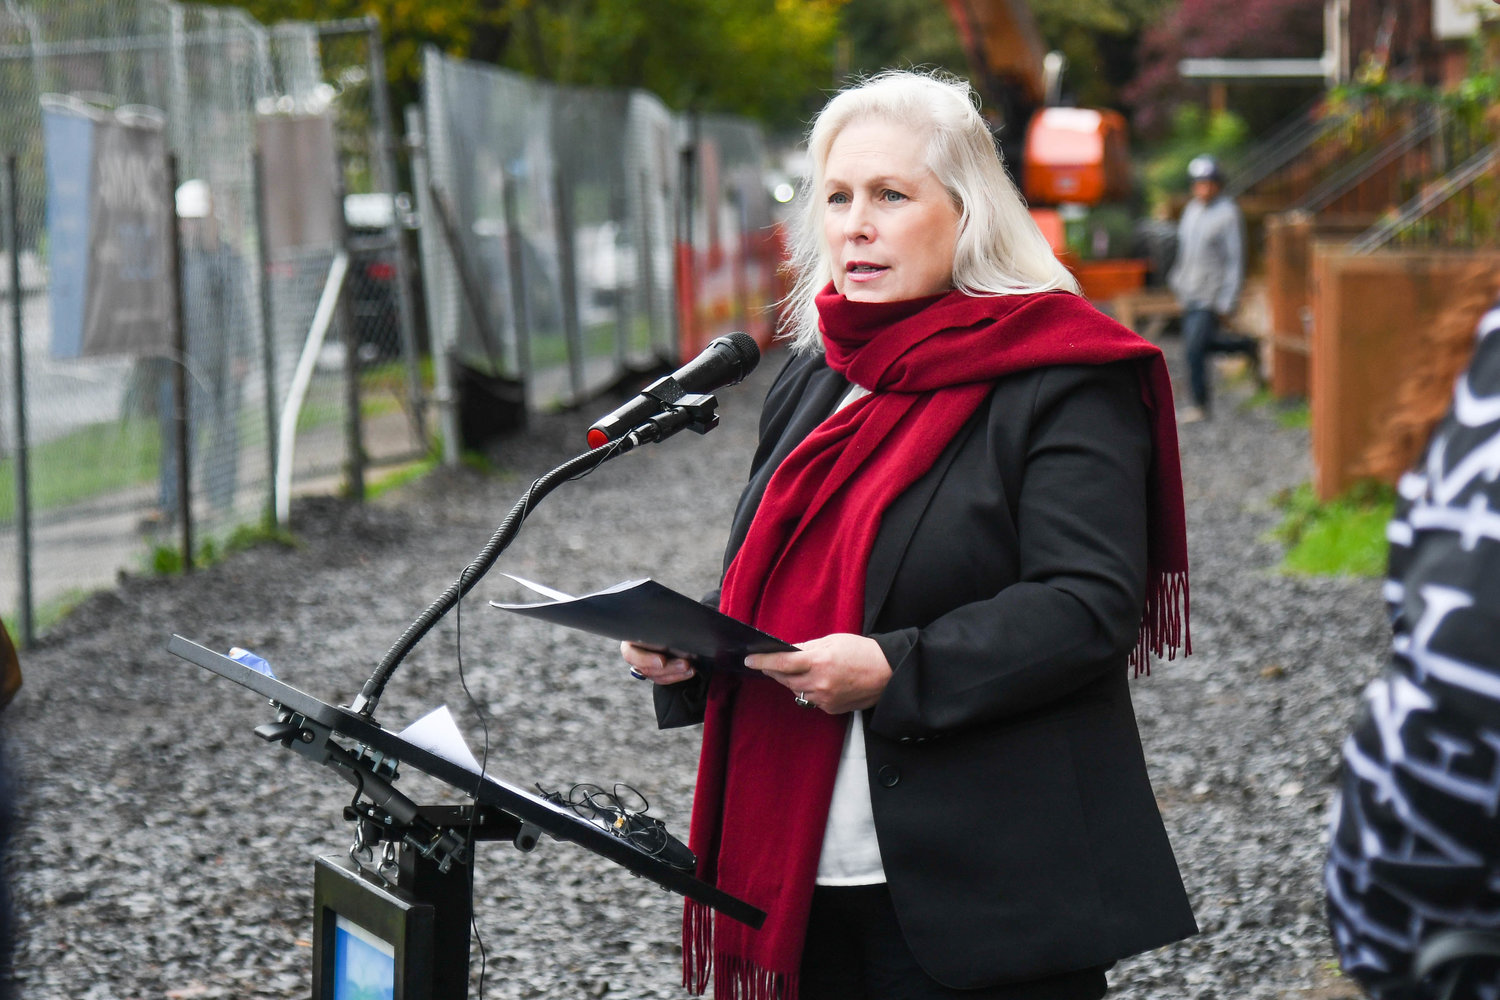 U.S. Senator Kirsten Gillibrand speaks at a press conference on Friday, Oct. 7, outside of the Olbiston Apartments in Utica. The senator highlighted the $1 billion in emergency supplemental Low Income Home Energy Assistance Program (LIHEAP) funding she fought to secure in the recently passed continuing resolution.